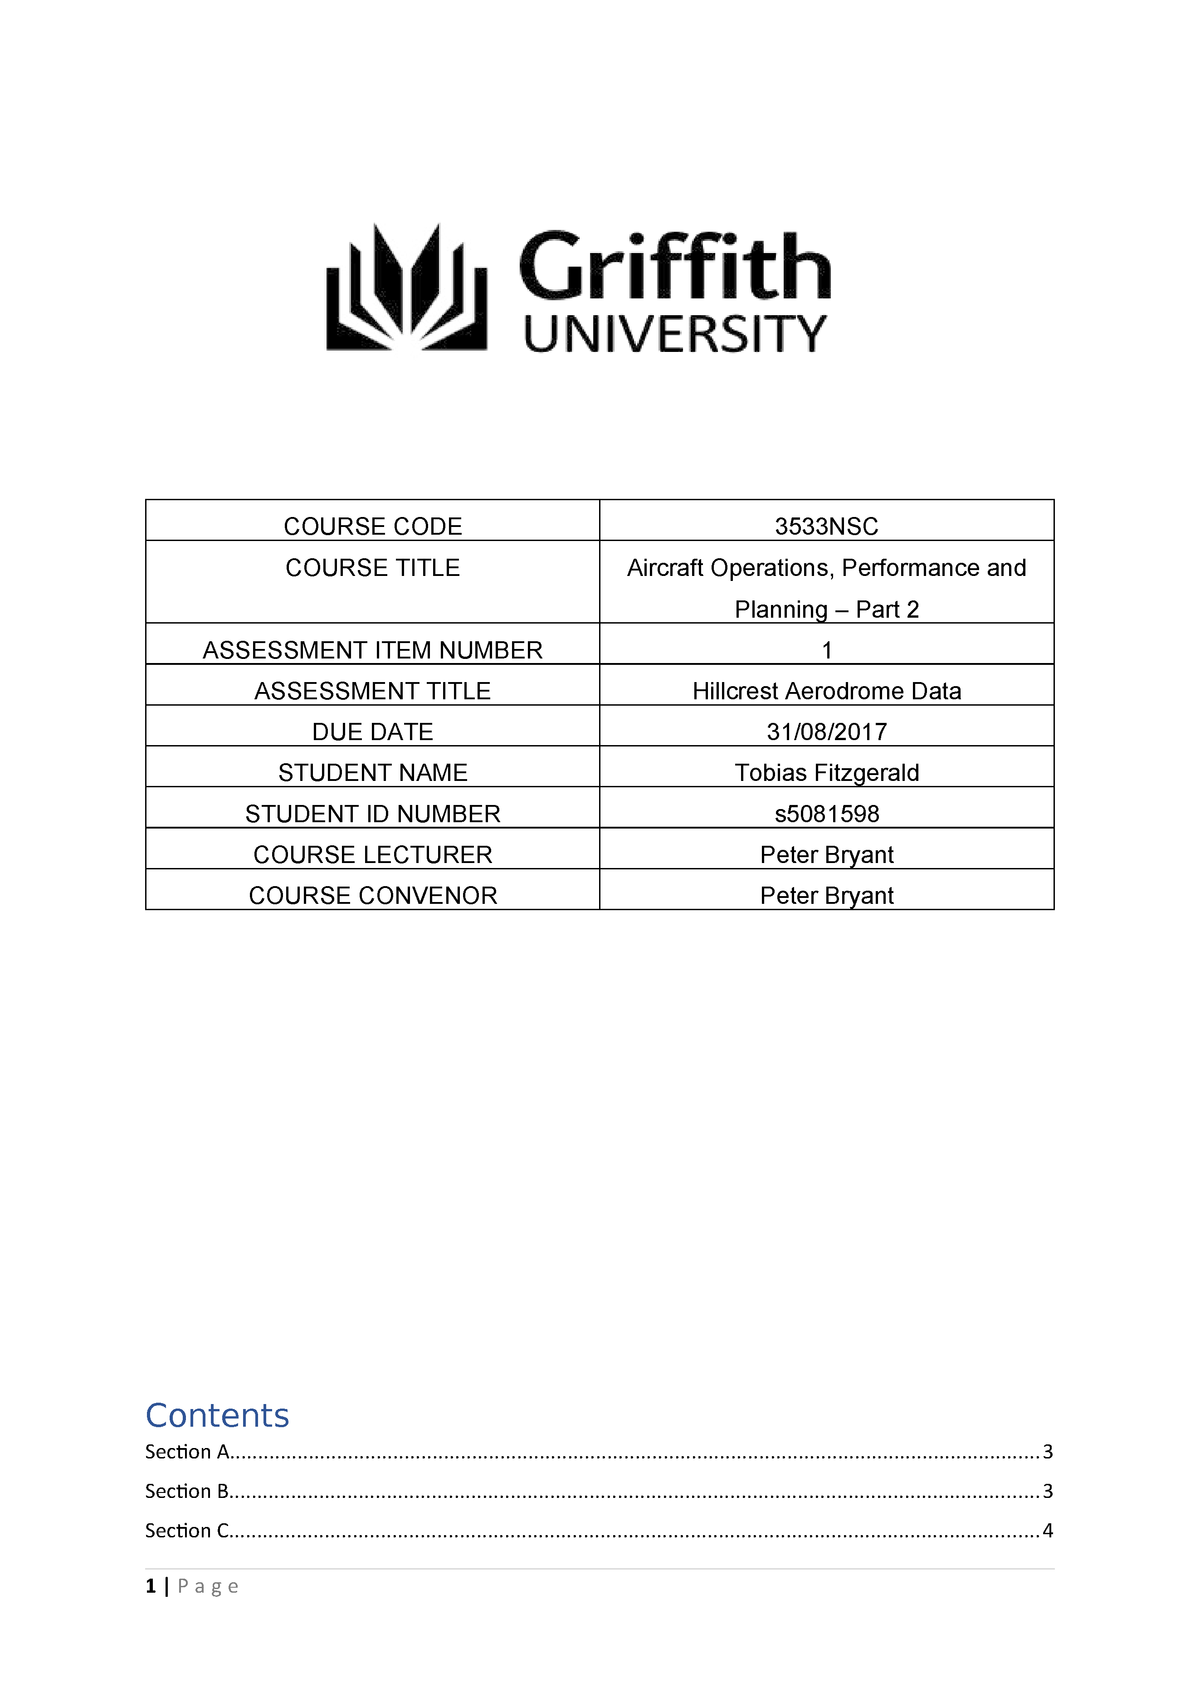 griffith uni assignment coversheet